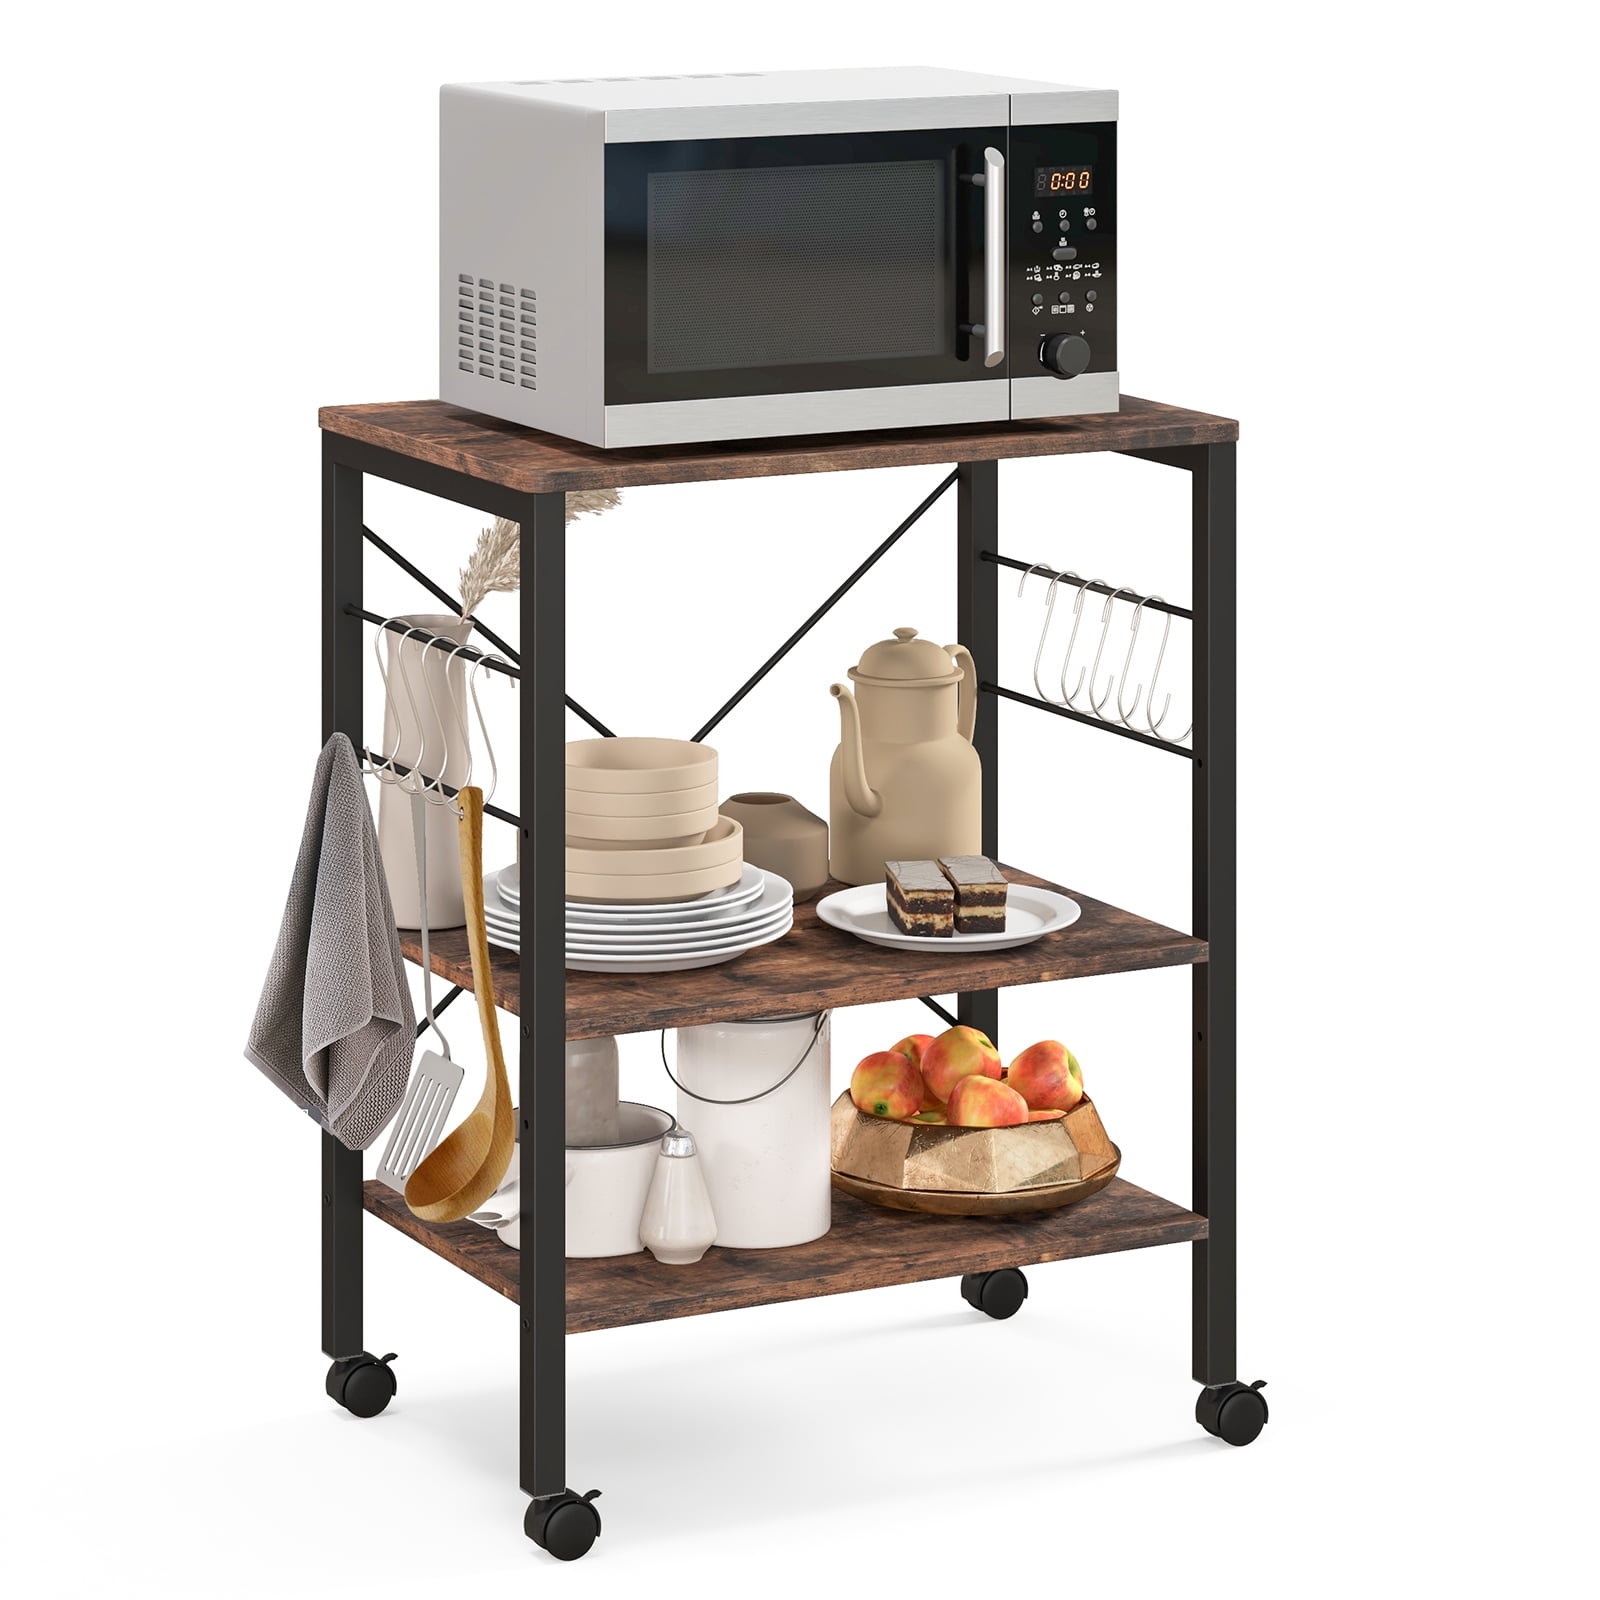 Microwave Oven Stand, 3Tier - Small, Black & Beige